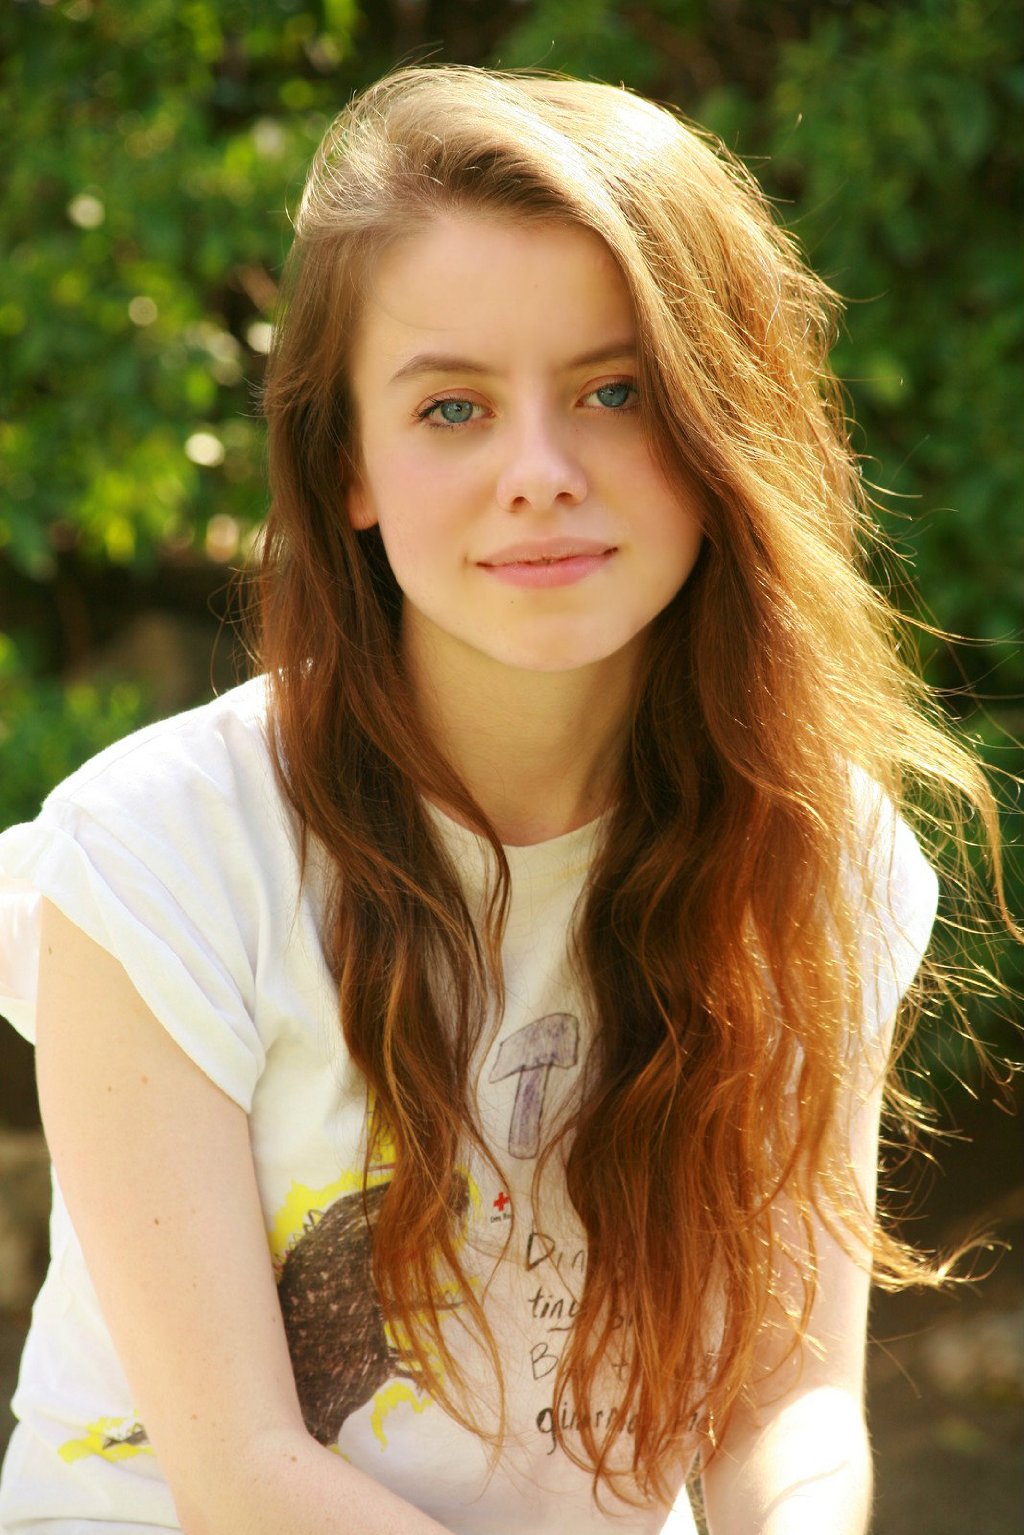 General photo of Rosie Day